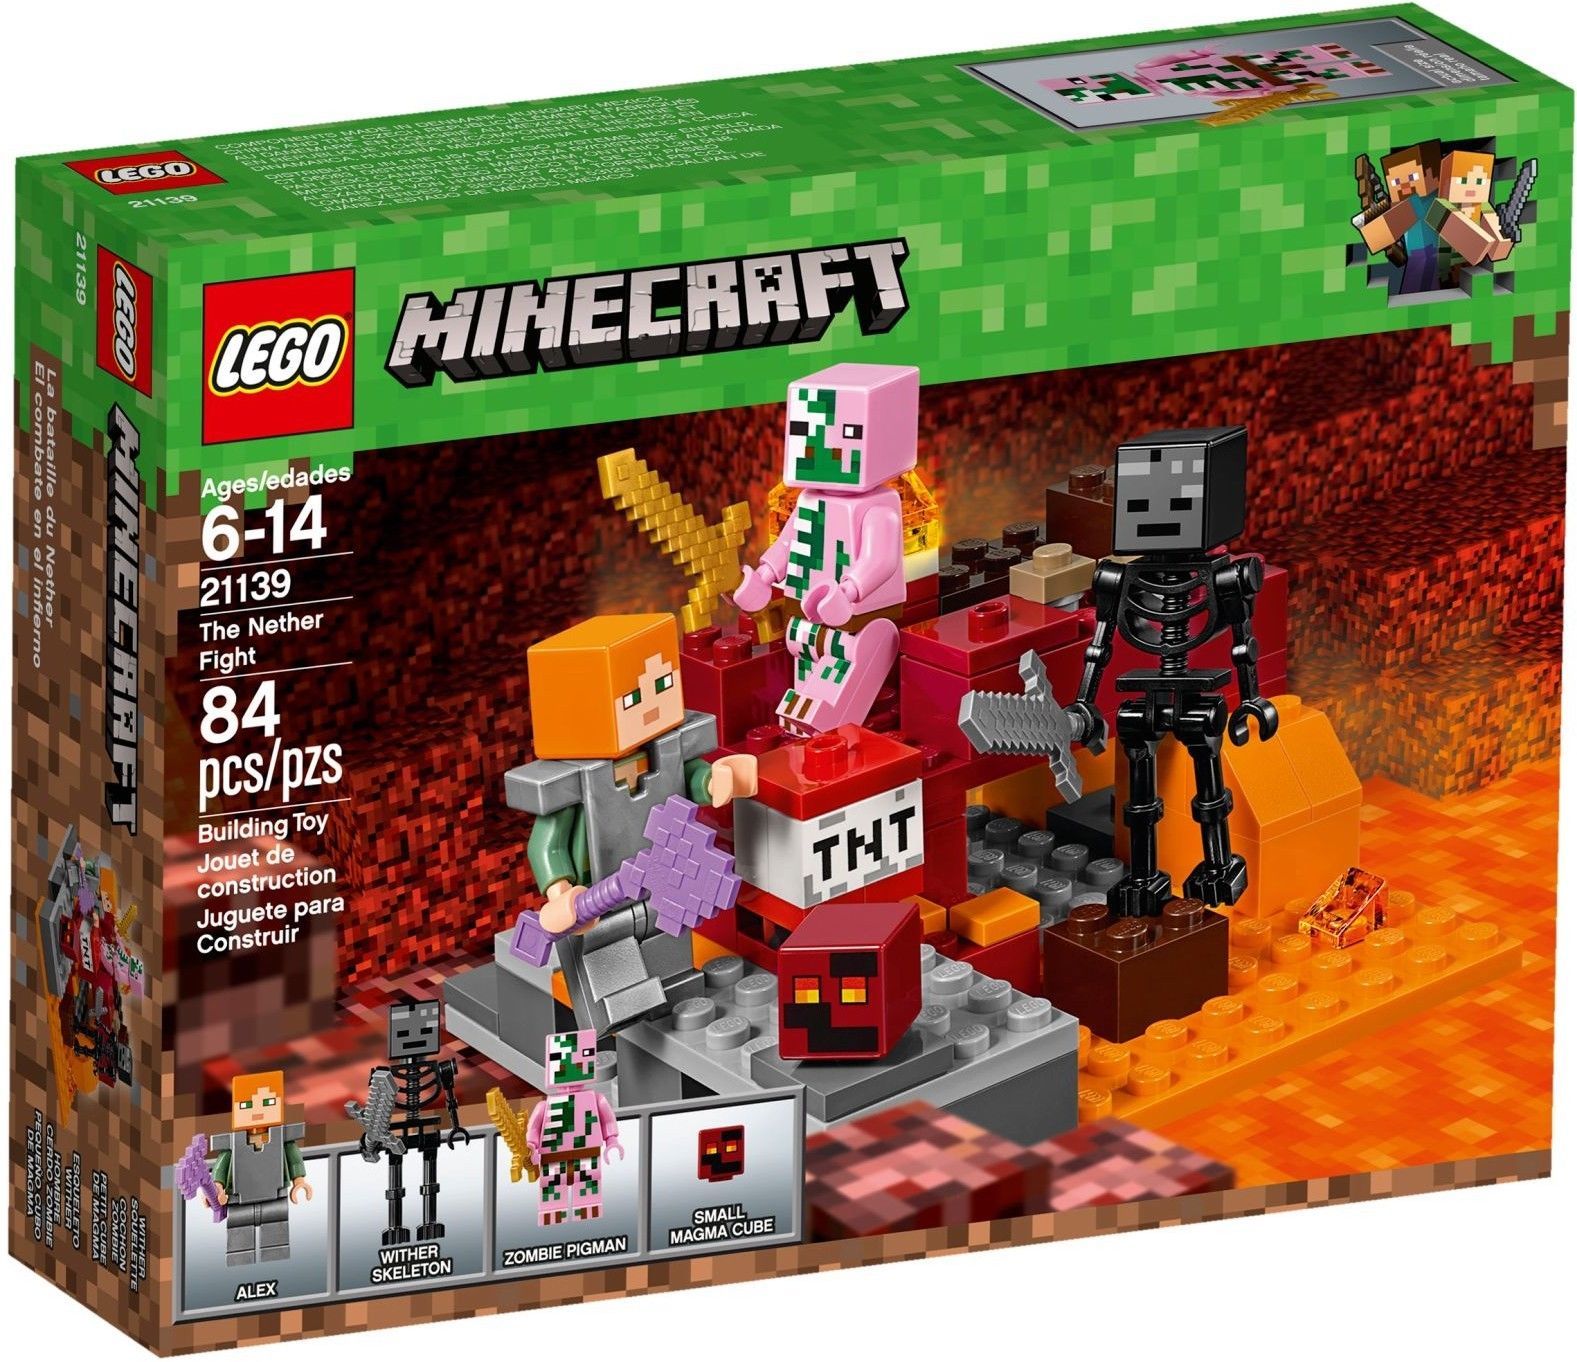 LEGO Minecraft The Nether Fight Set 21139 [New] Building Toy - LEGO ...